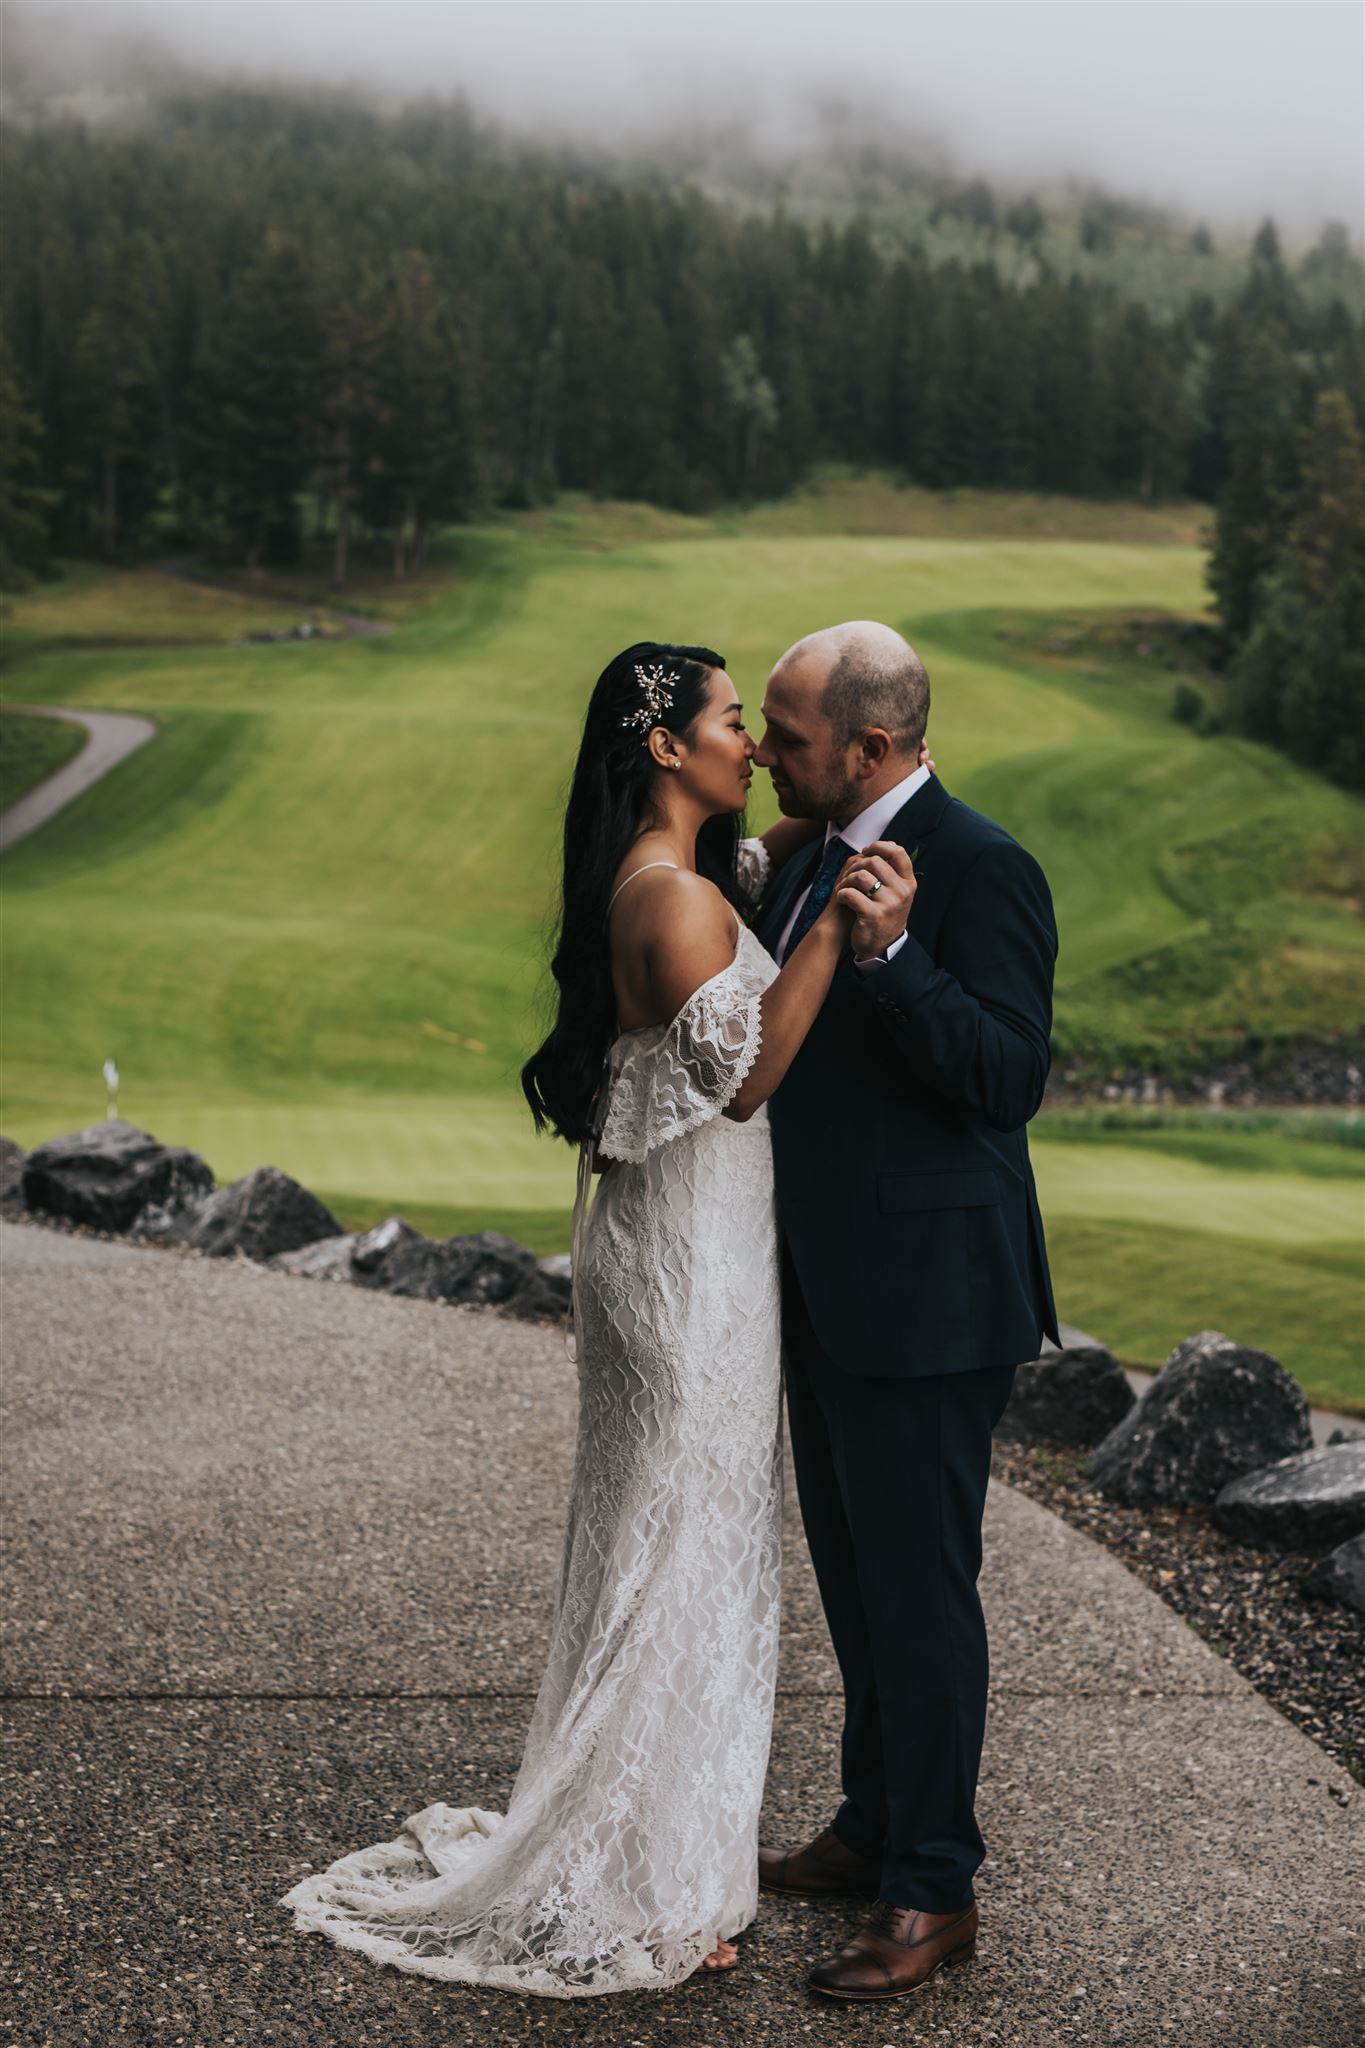 Bride and Groom Portraits in the rain at silvertip resort in canmore, alberta